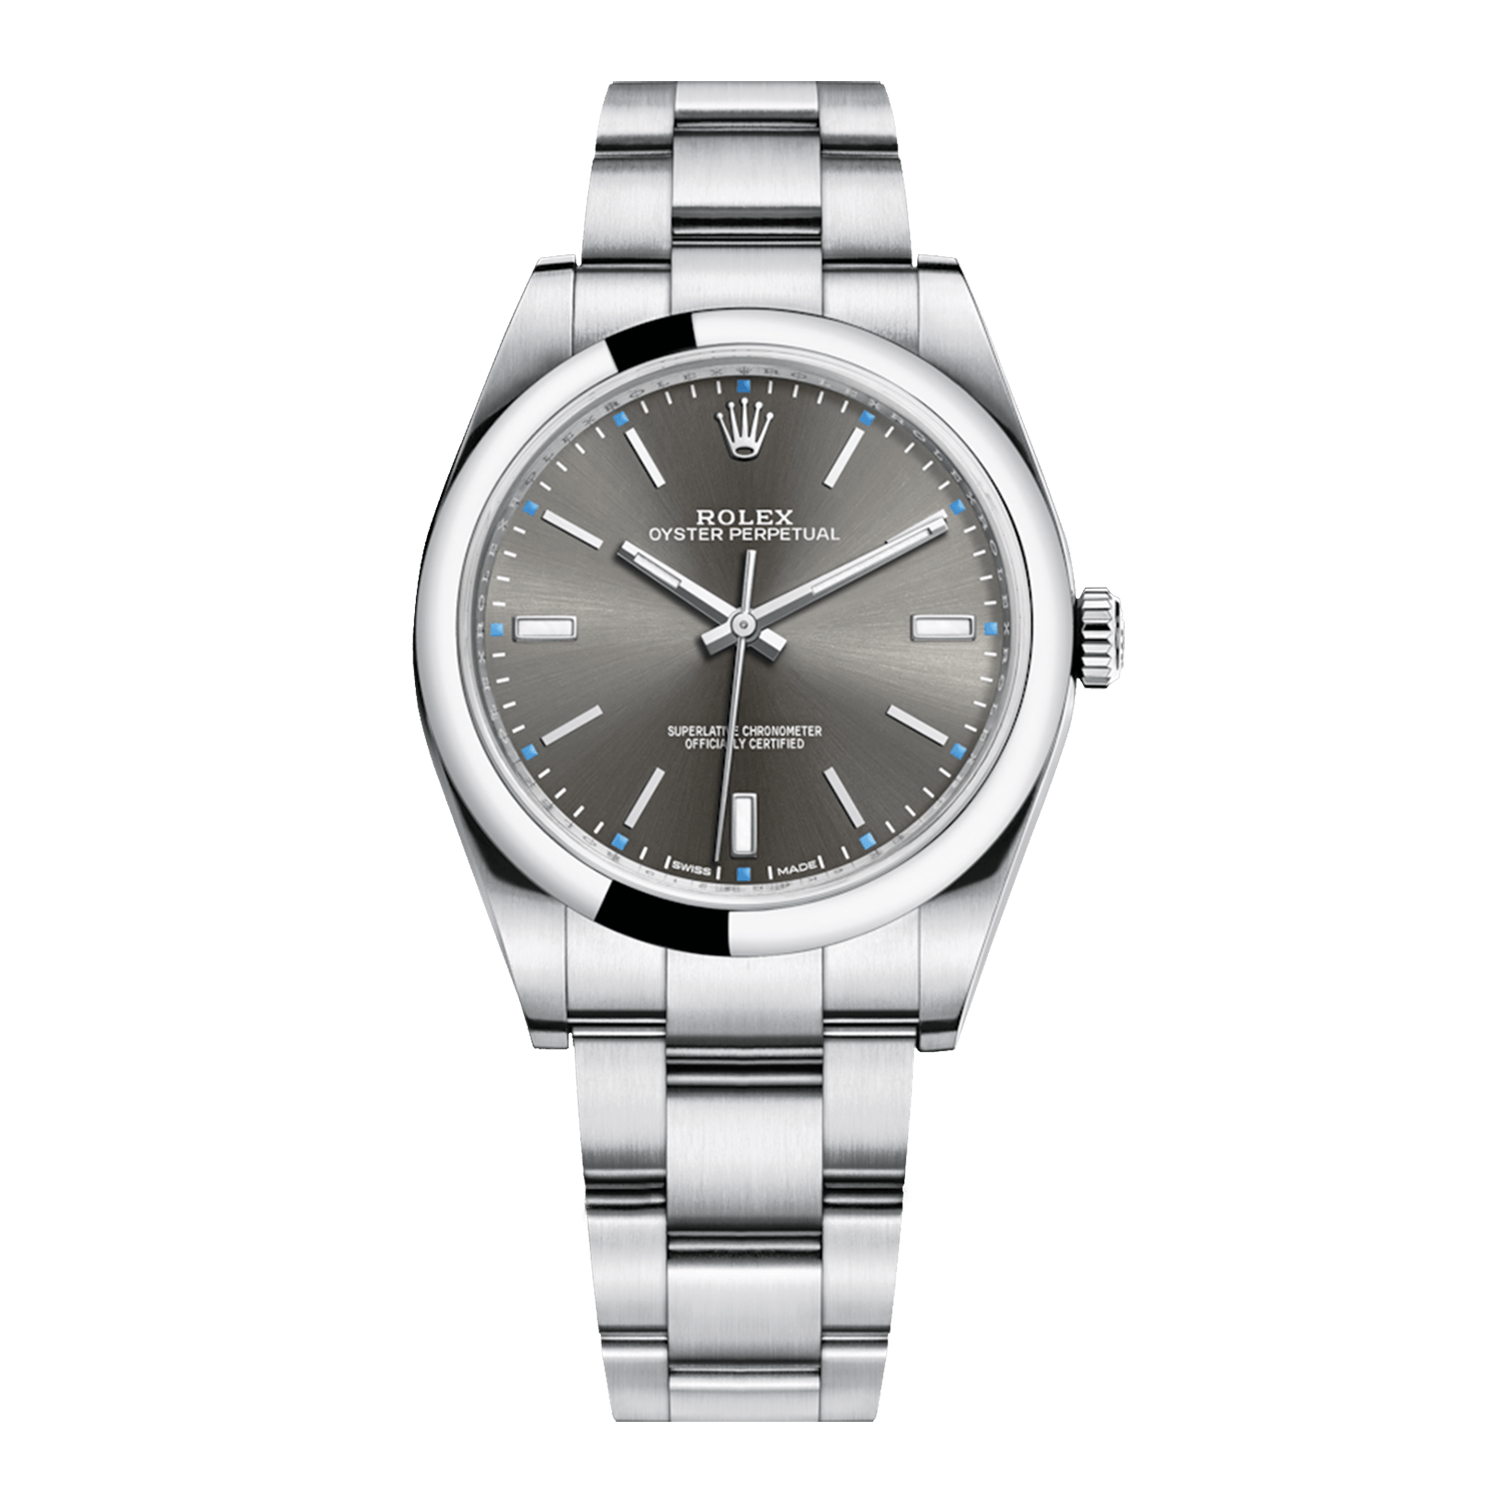 Rolex Oyster Perpetual 114300 | Watchdreamer